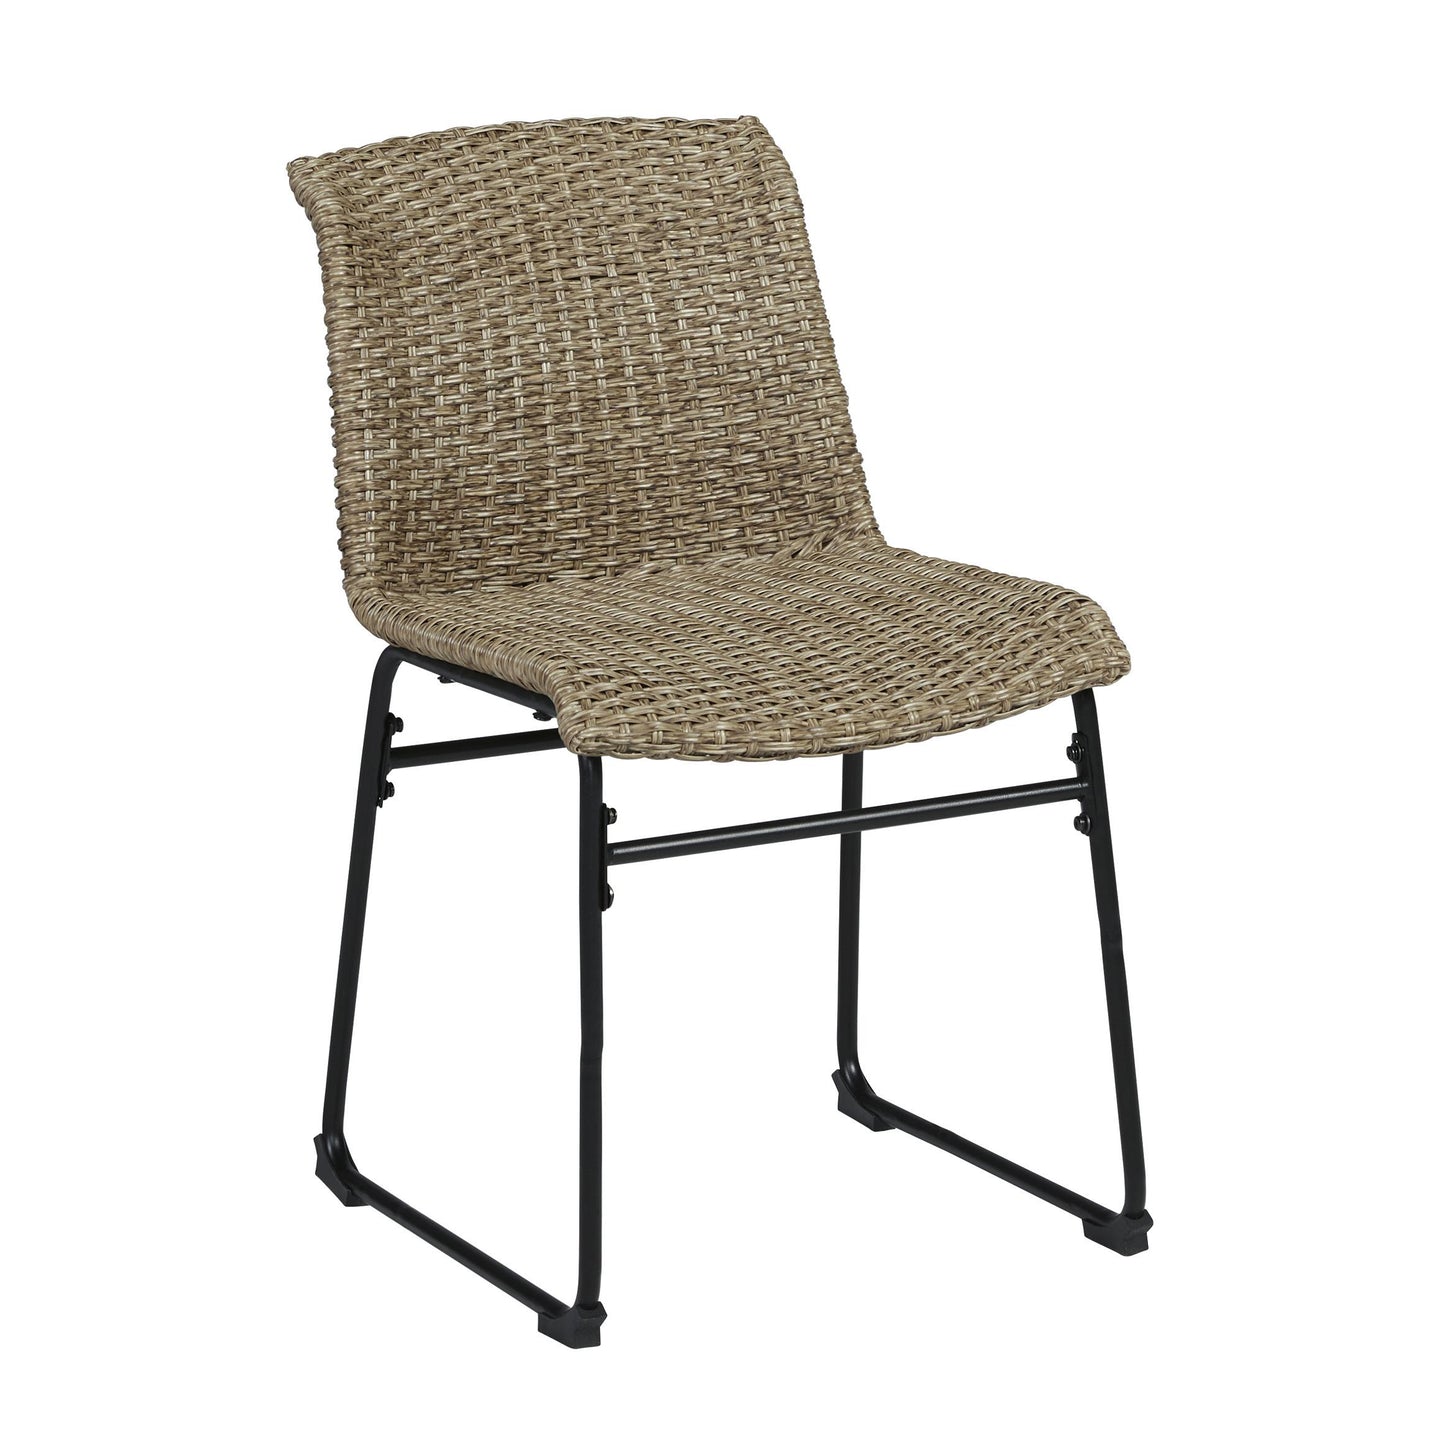 Signature Design by Ashley Outdoor Seating Dining Chairs P369-601 IMAGE 1